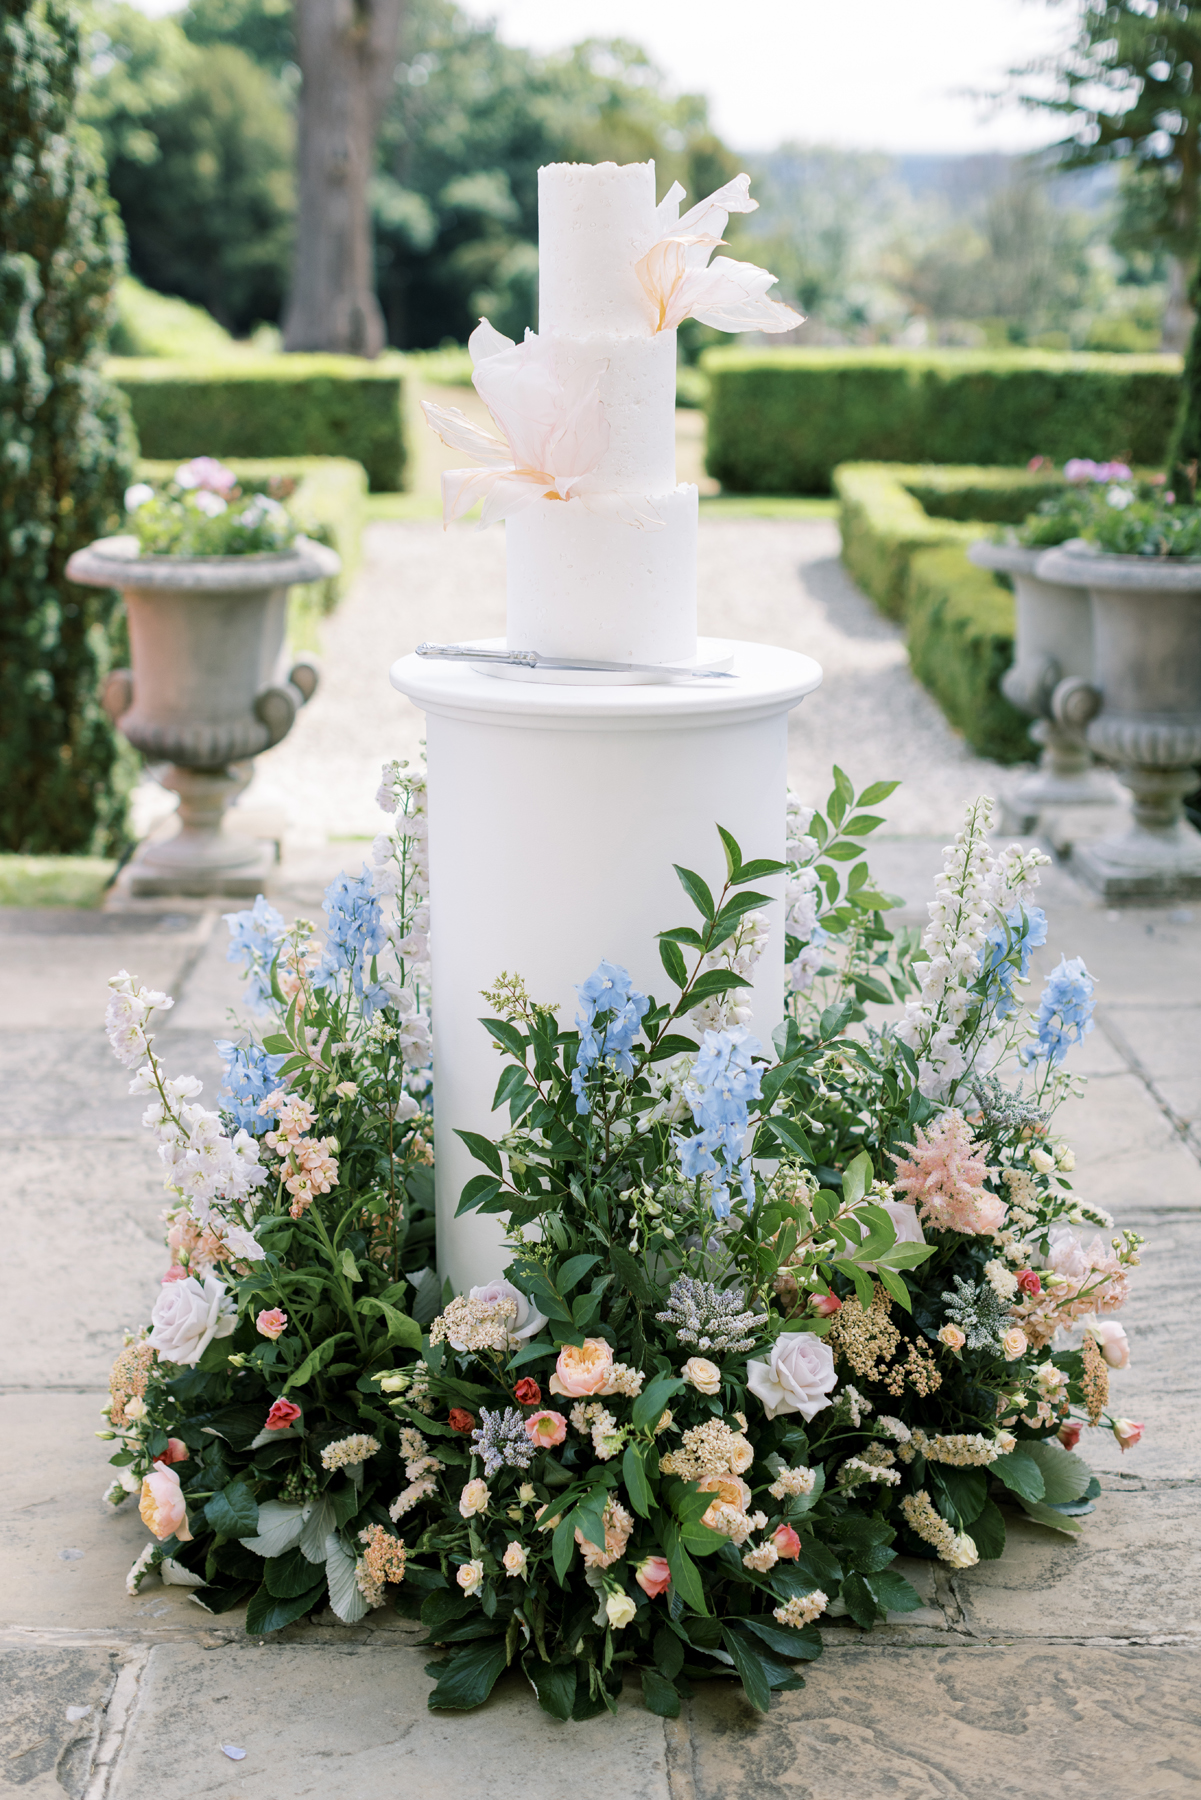 Hedsor House wedding Planner - three tier wedding cake sitting on white plinth surrounded in flowers